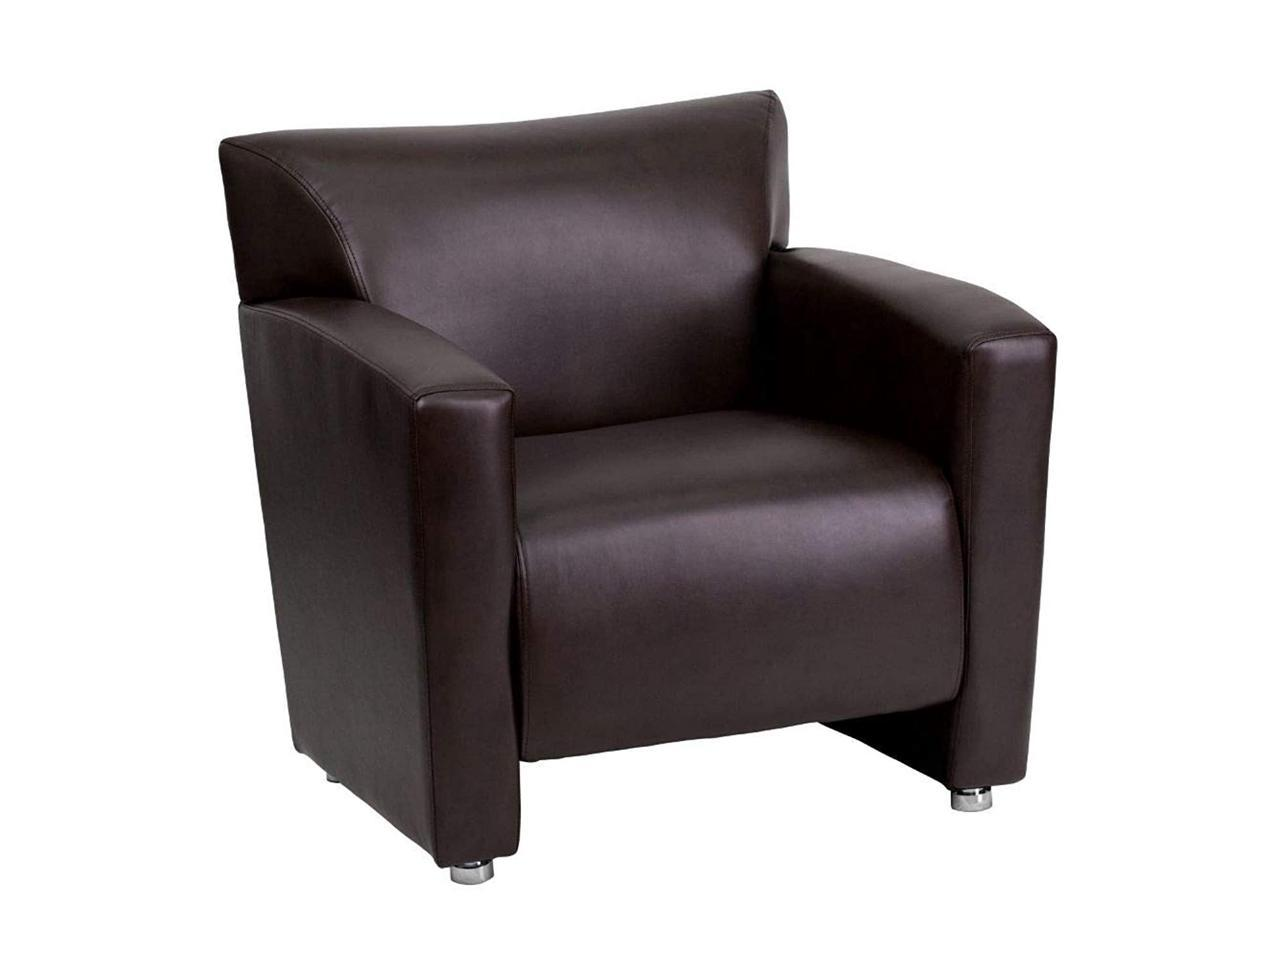 Modern Brown Leather Modular Reception Seating Chair